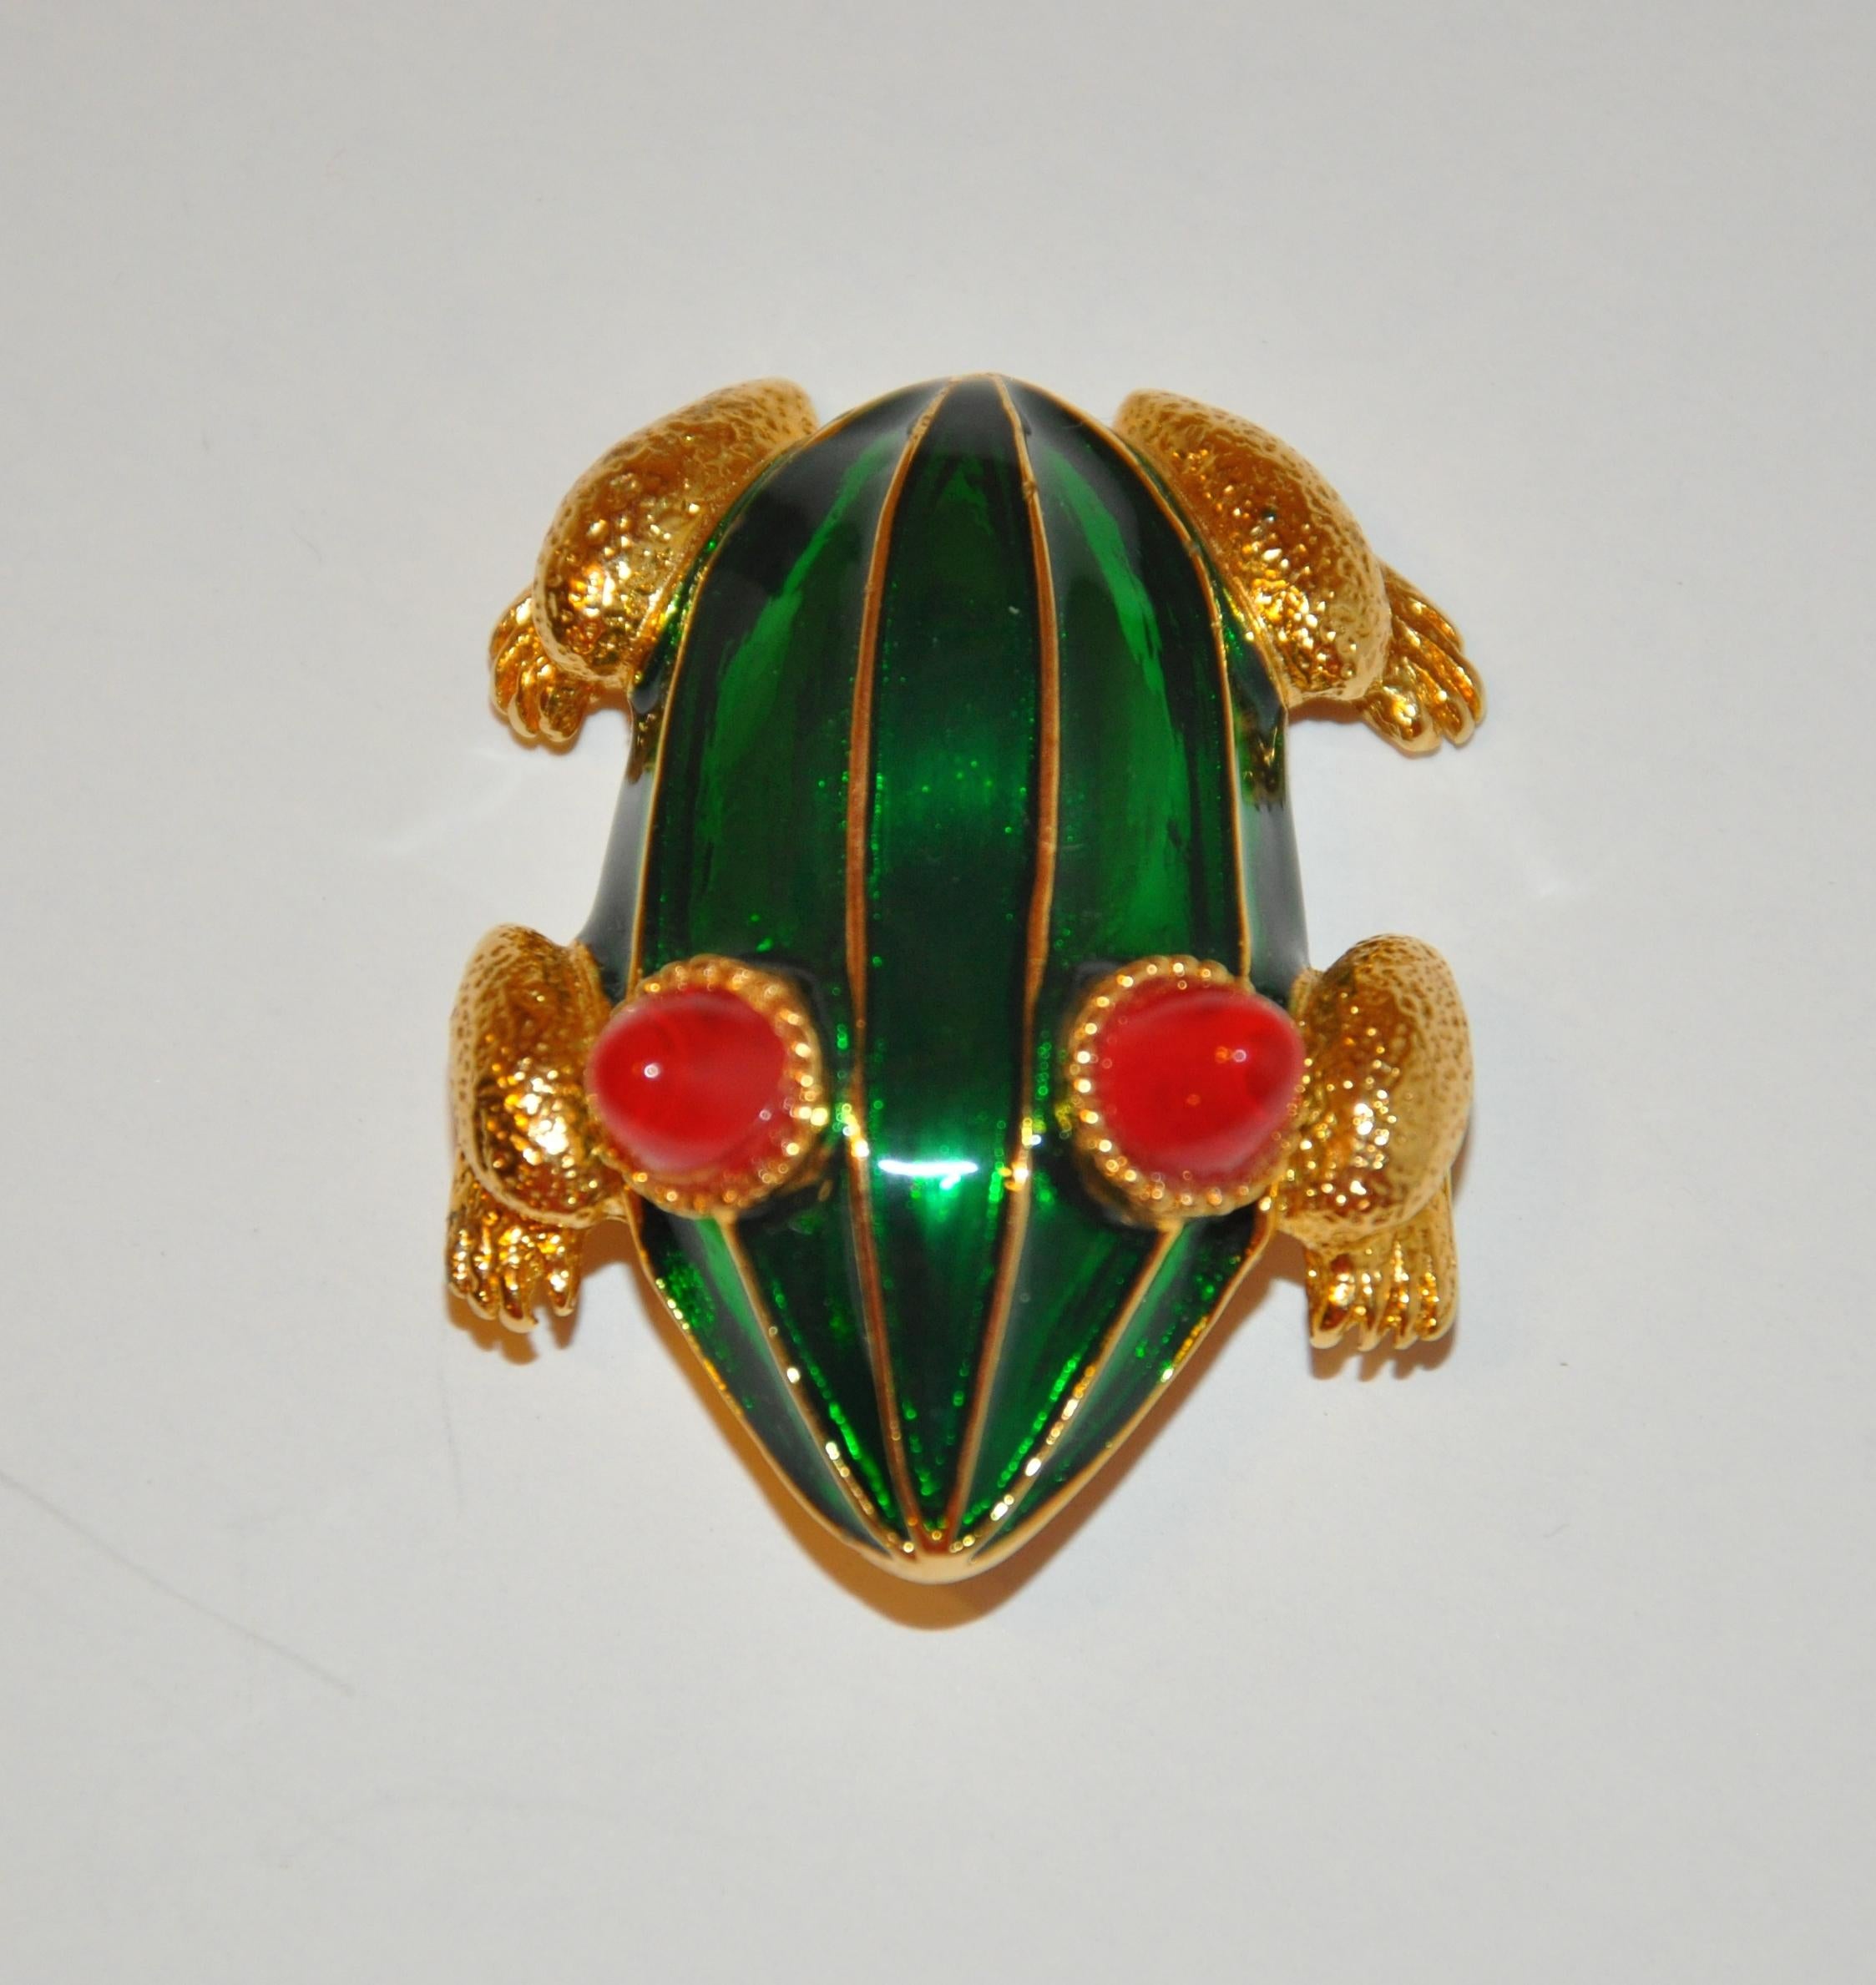 Baroque Kenneth Lane Rare Vivid Whimsical Green Enamel with Red Accent 